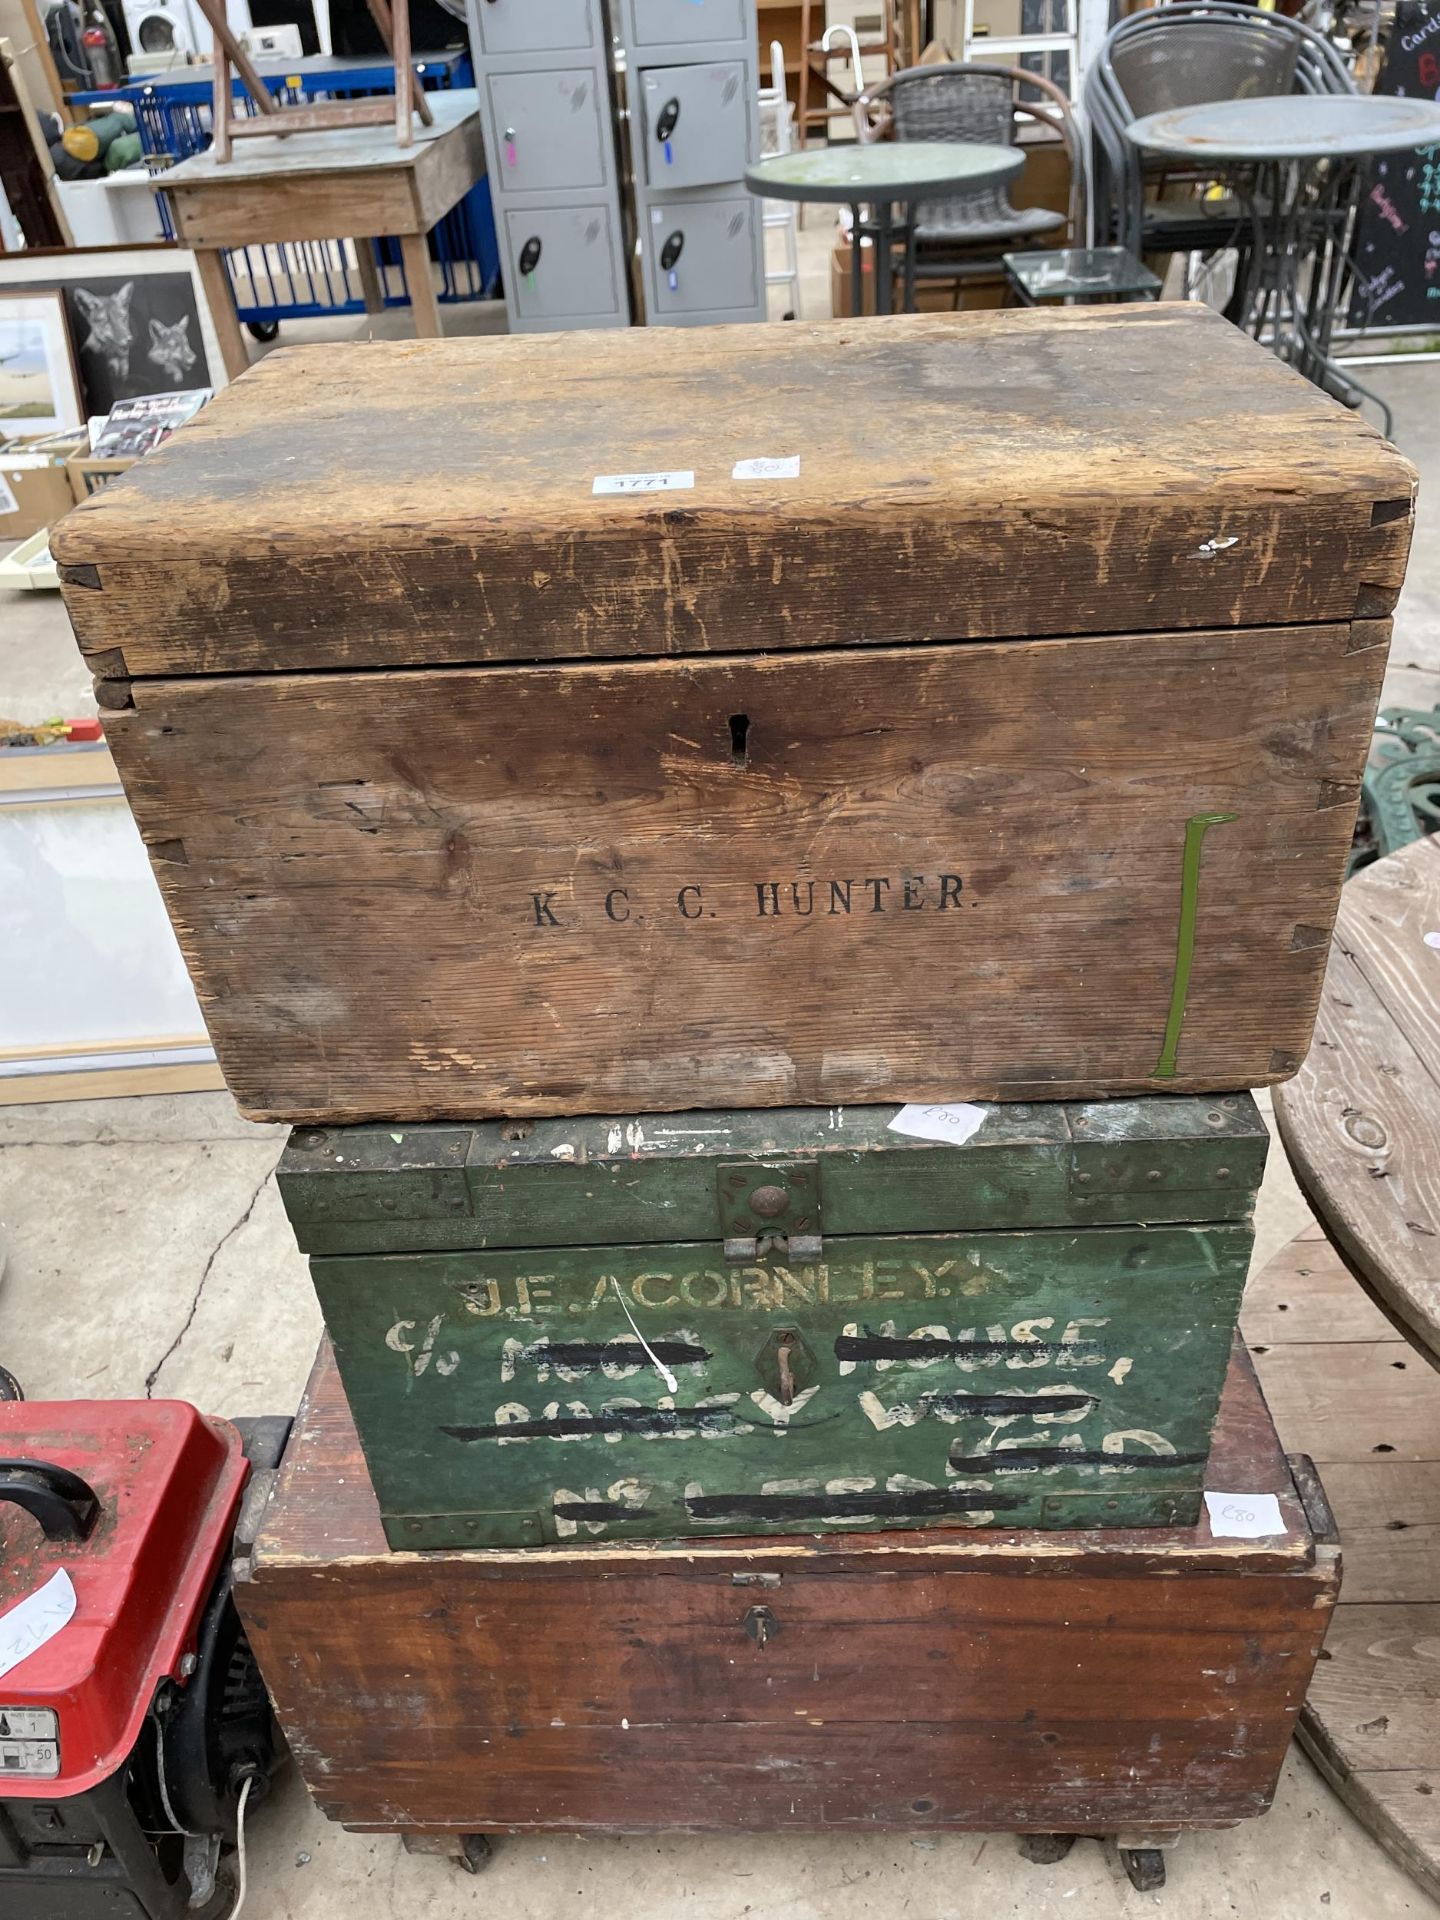 THREE VARIOUS WOODEN STORAGE BOXES TO INCLUDE ONE STAMPED K.C.C. HUNTER